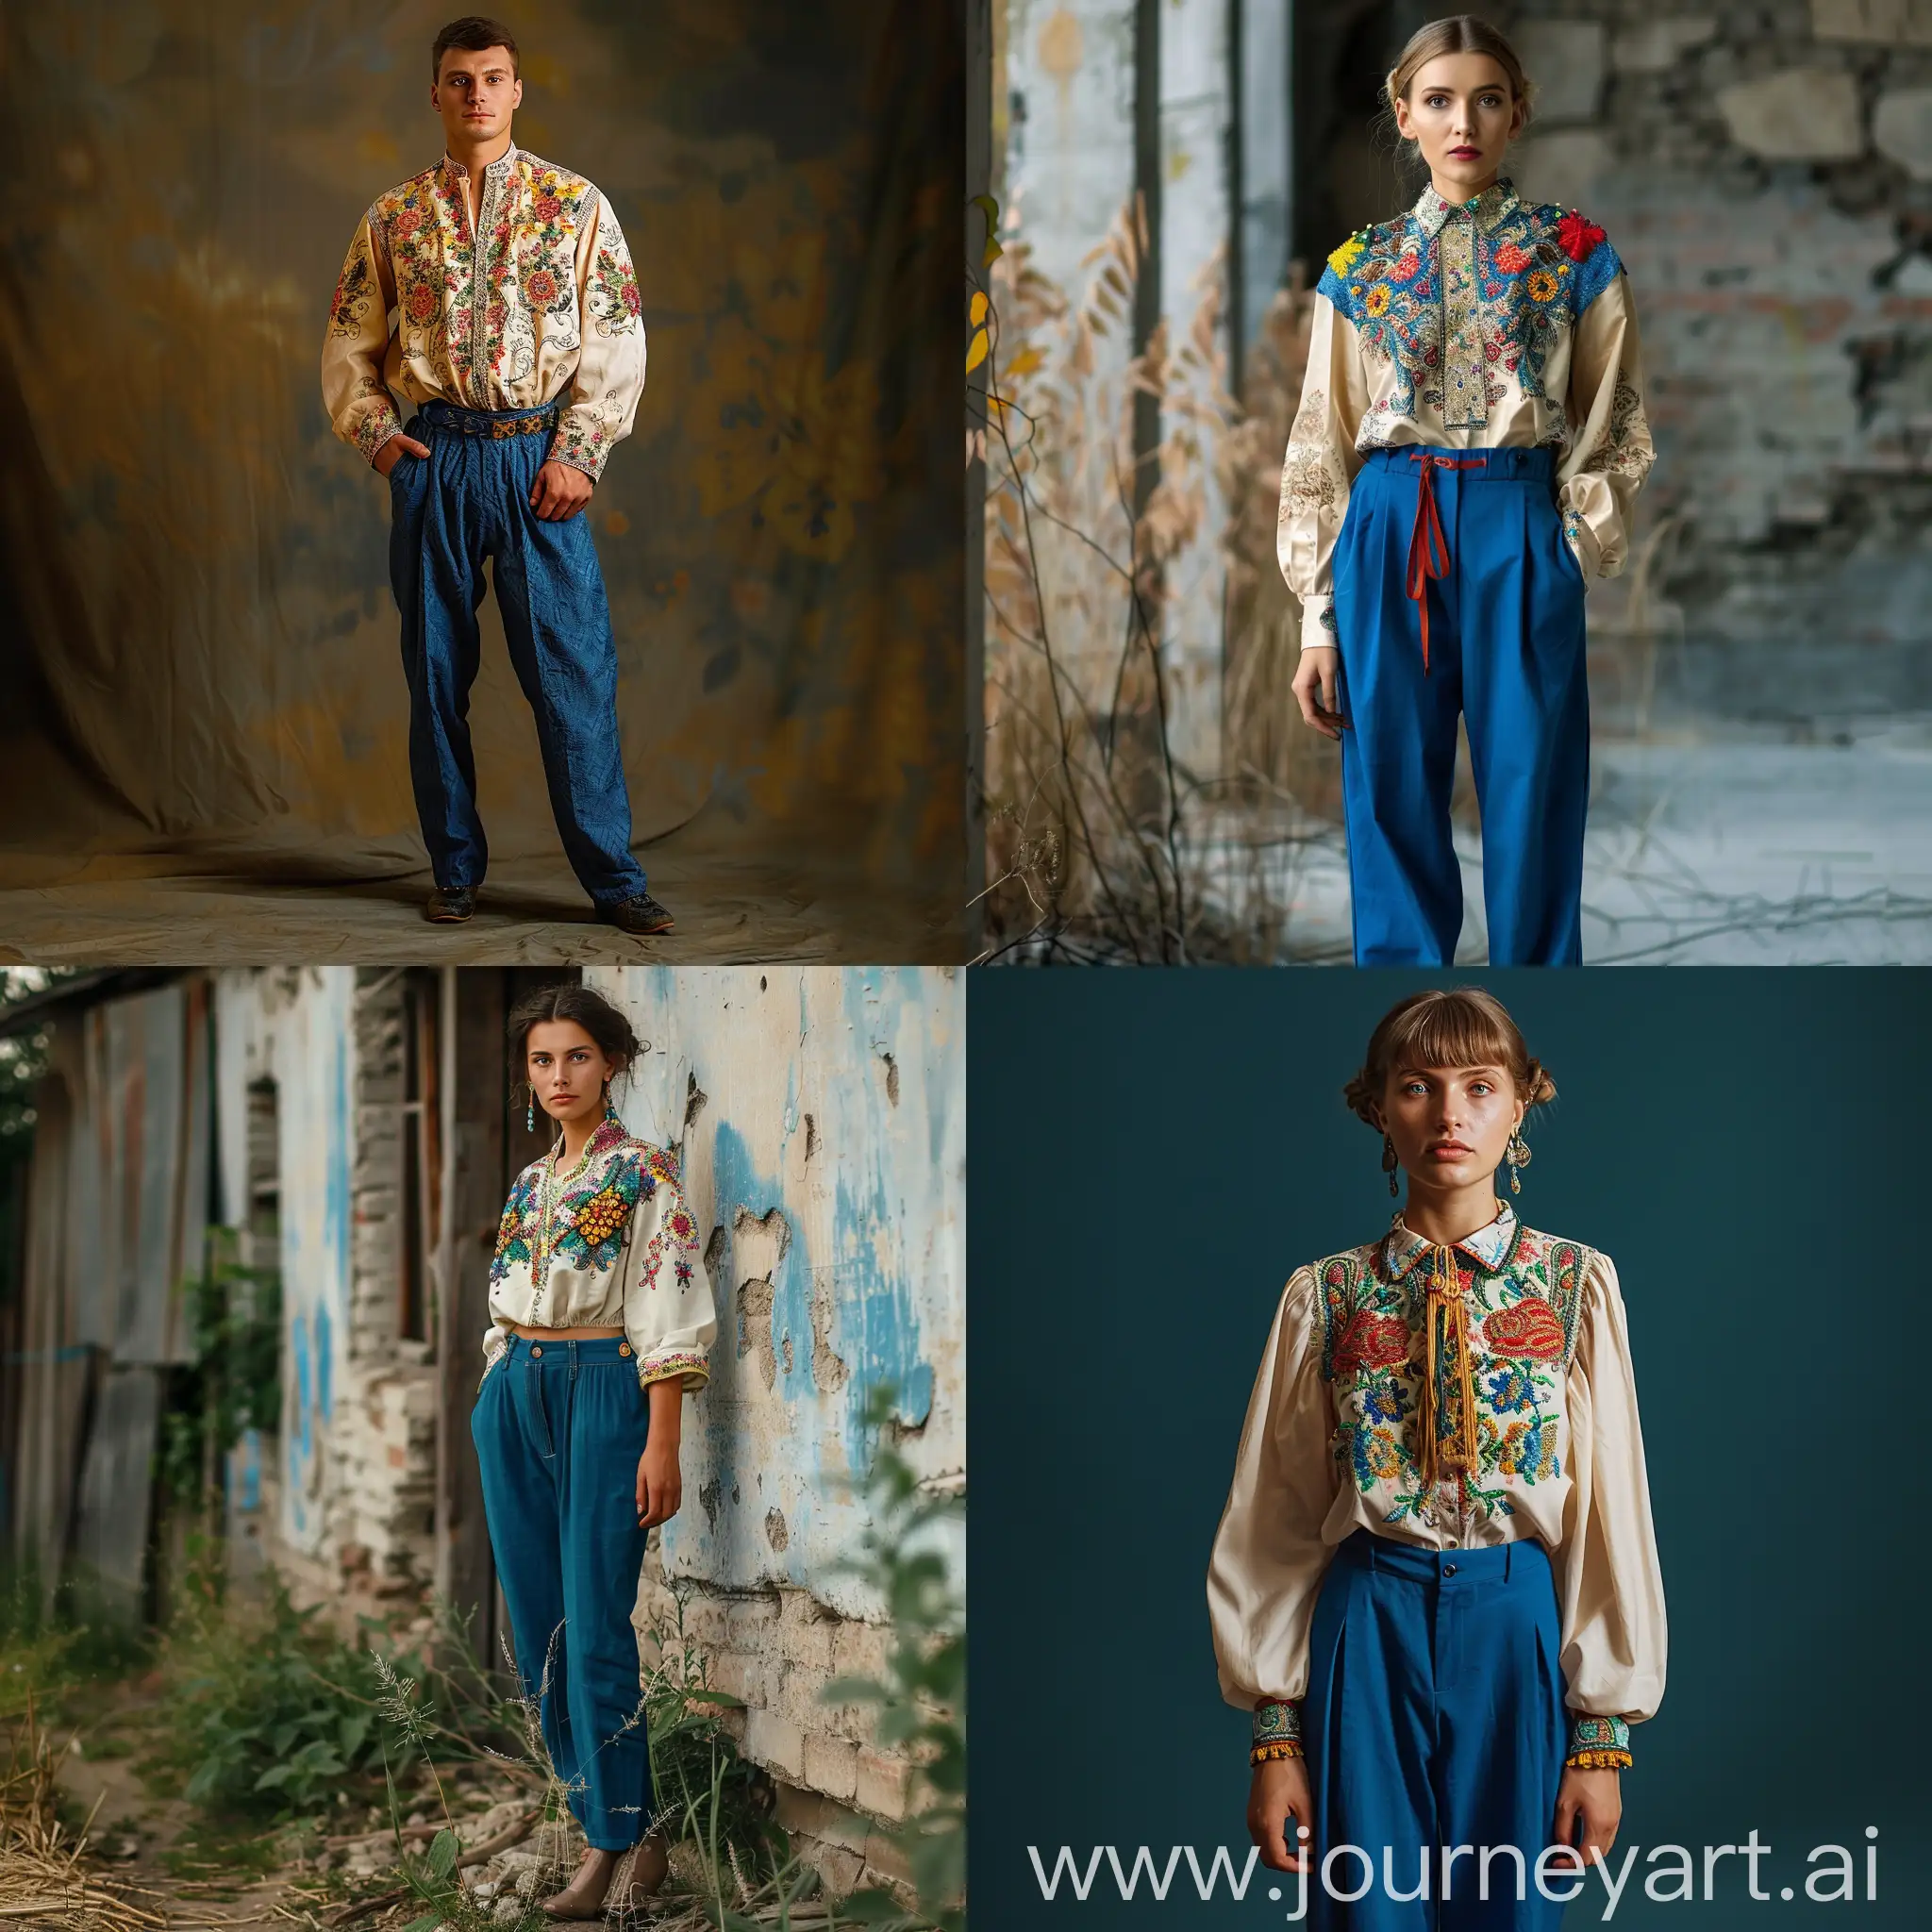 Traditional-Ukrainian-Man-in-Embroidered-Shirt-and-Blue-Trousers